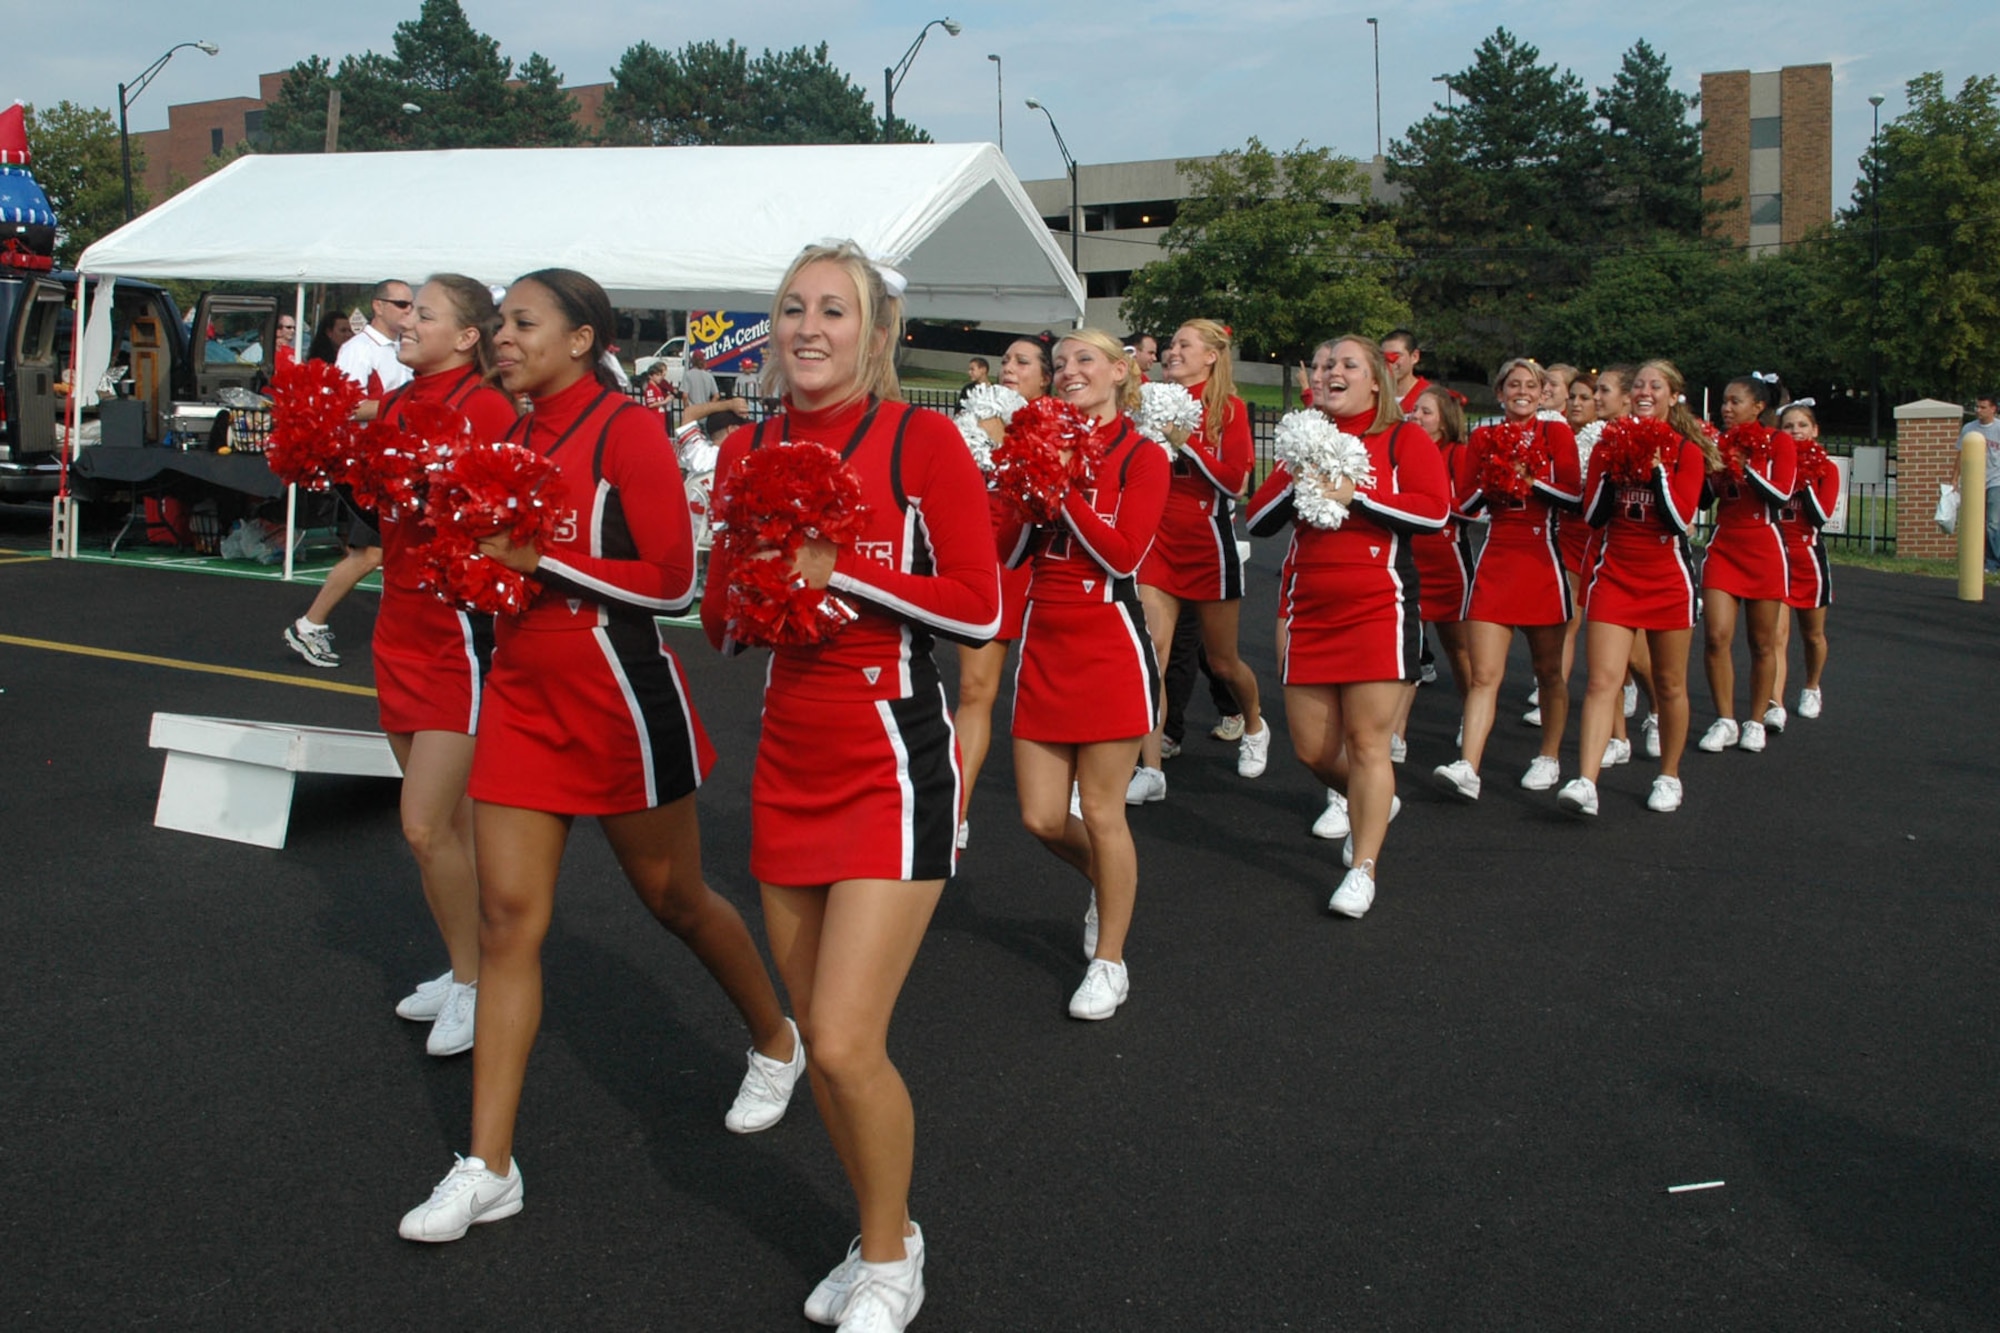 YOUNGSTOWN STATE UNIVERSITY, Ohio — The Youngstown State University cheerleaders show their school spirit as 370 Airmen, family members and friends from the Air Force Reserve's 910th Airlift Wing, based at Youngstown Air Reserve Station, attend a pre-game tailgate lot celebration and the home opener of the YSU Penguin's 2007 football season in recognition of the U.S. Air Force's 60th birthday. U.S. Air Force photo/ Tech. Sgt. Bob Barko Jr. 